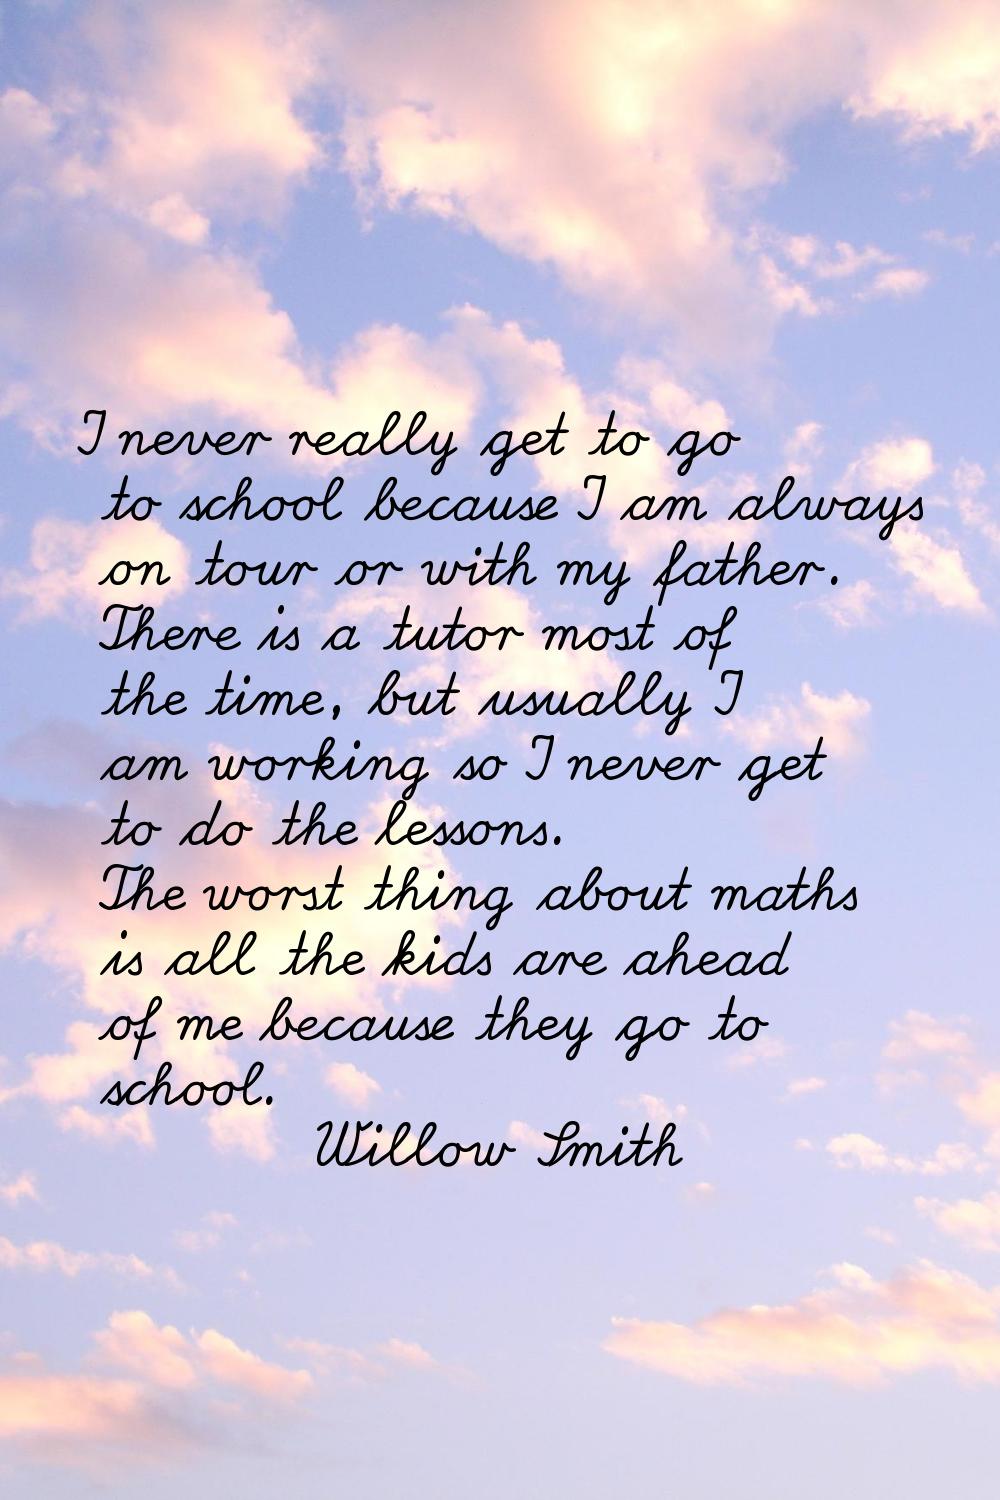 I never really get to go to school because I am always on tour or with my father. There is a tutor 